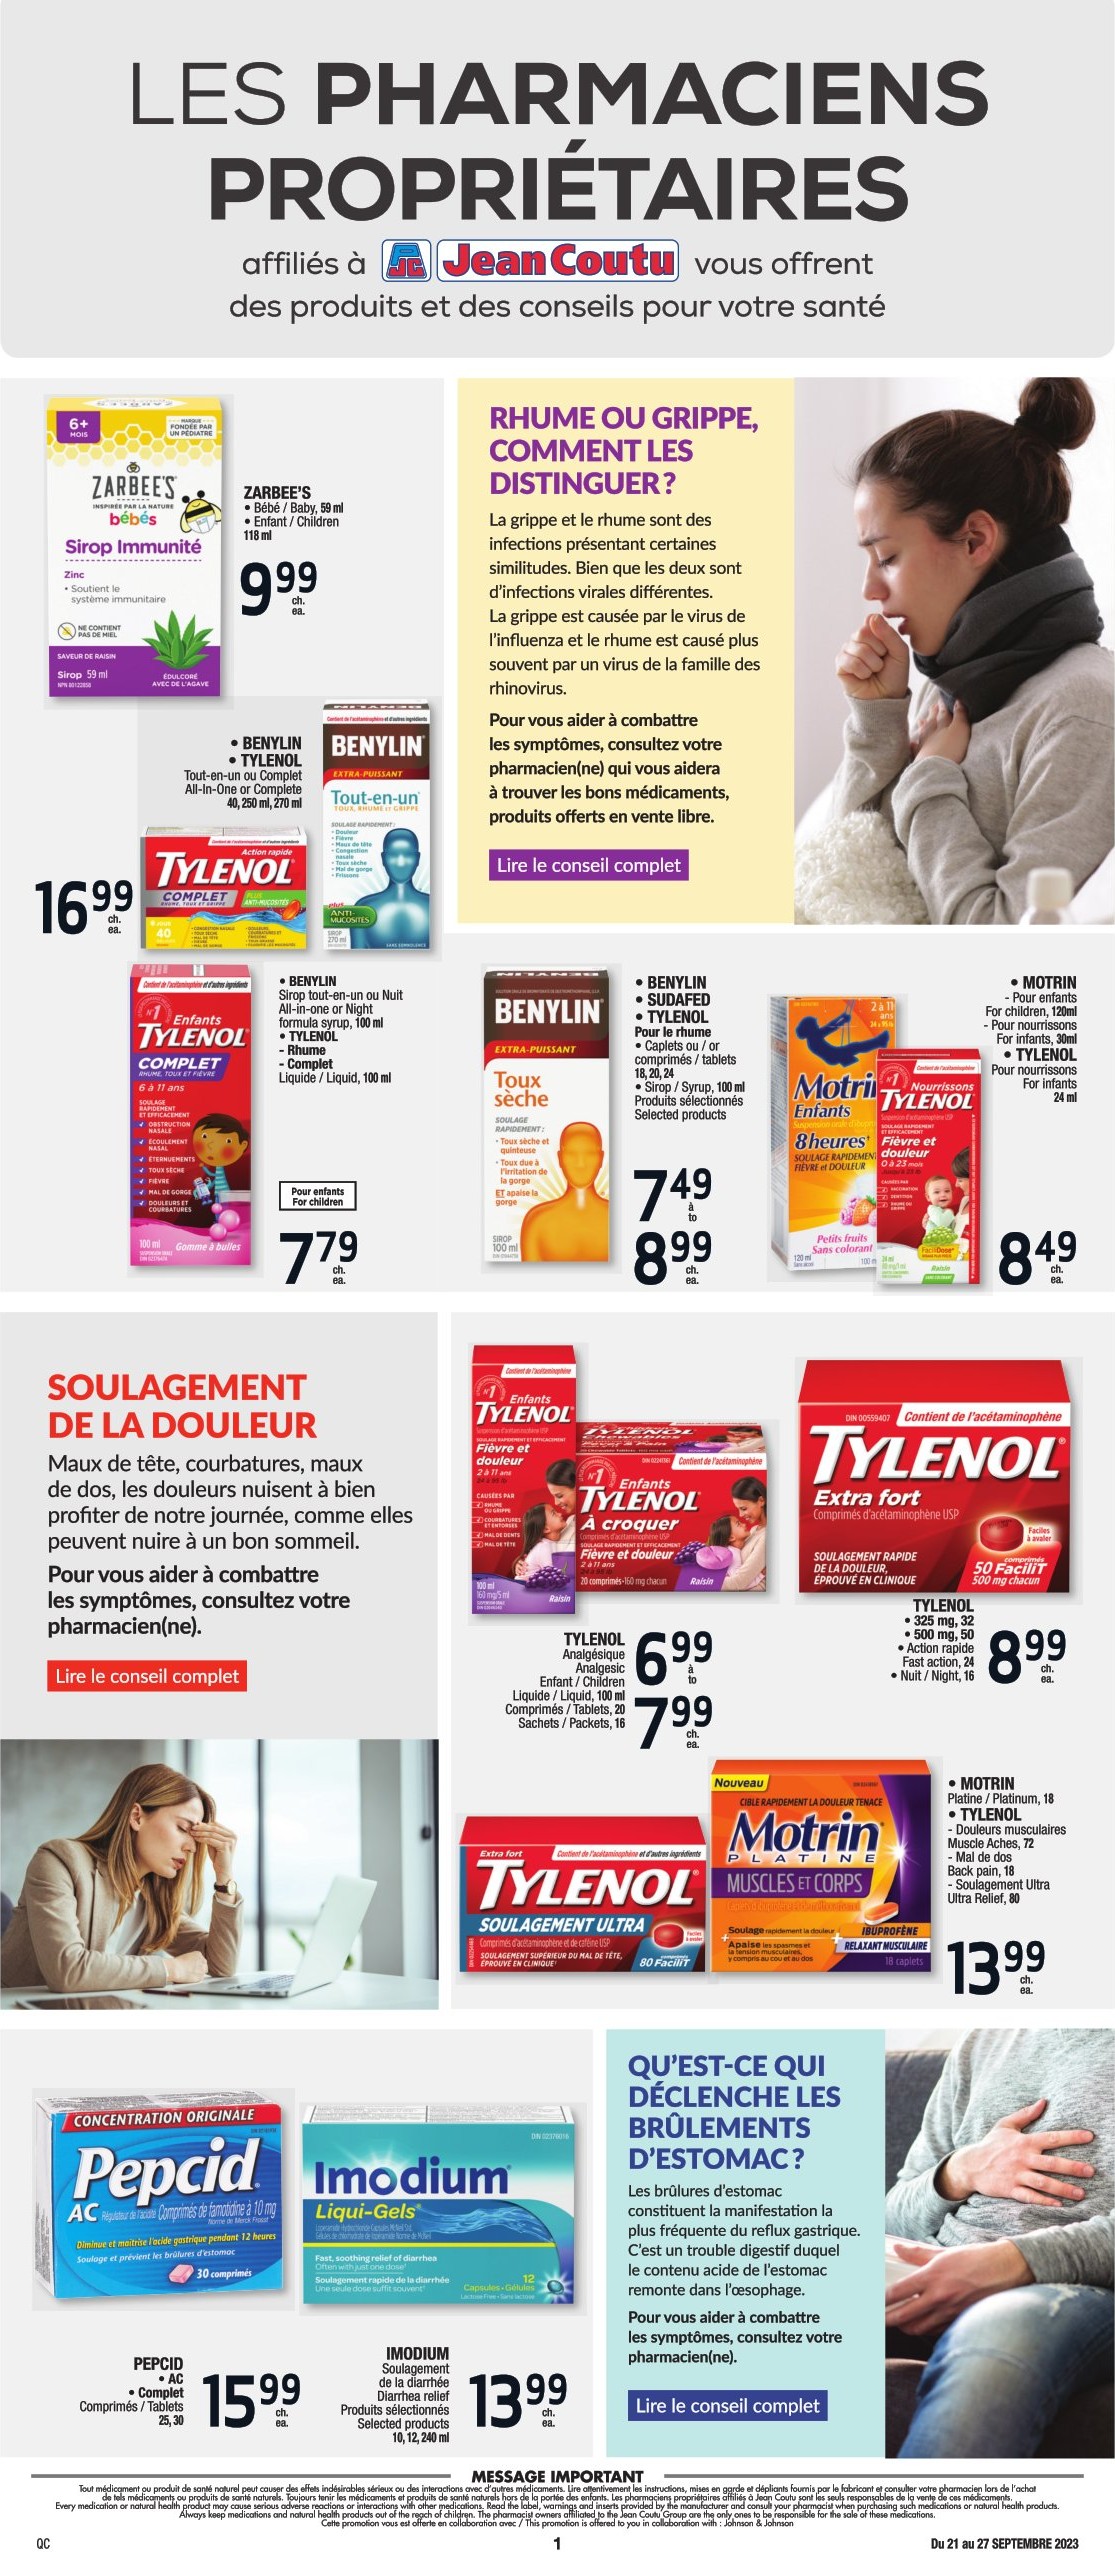 Circulaire Jean Coutu - Page 4